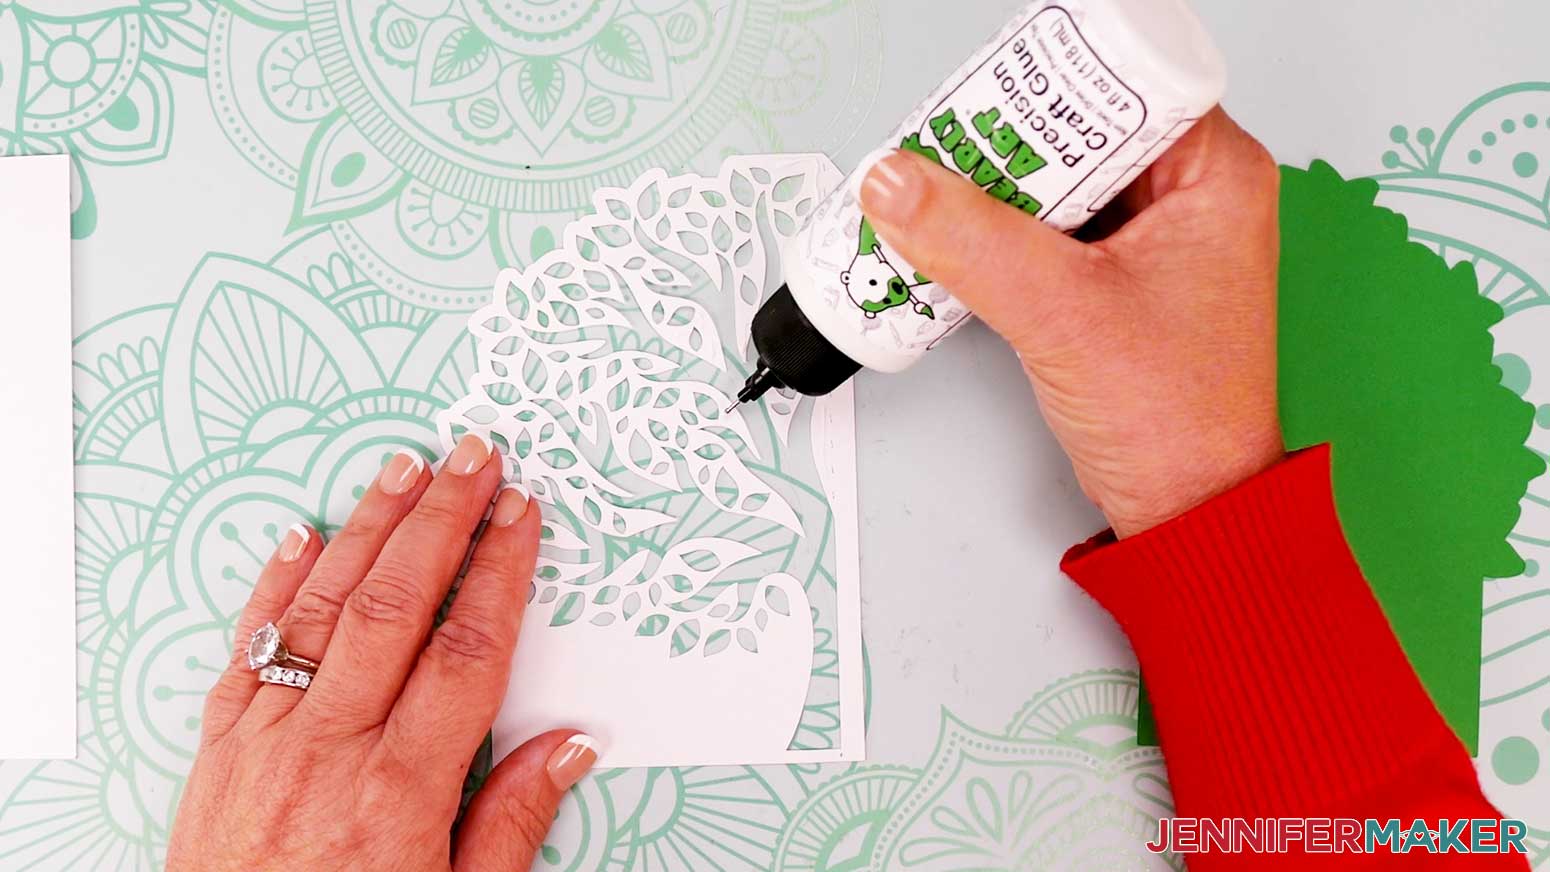 Use a precision glue tip to apply glue in between the cutouts of the front panel for the tree shaped edge card